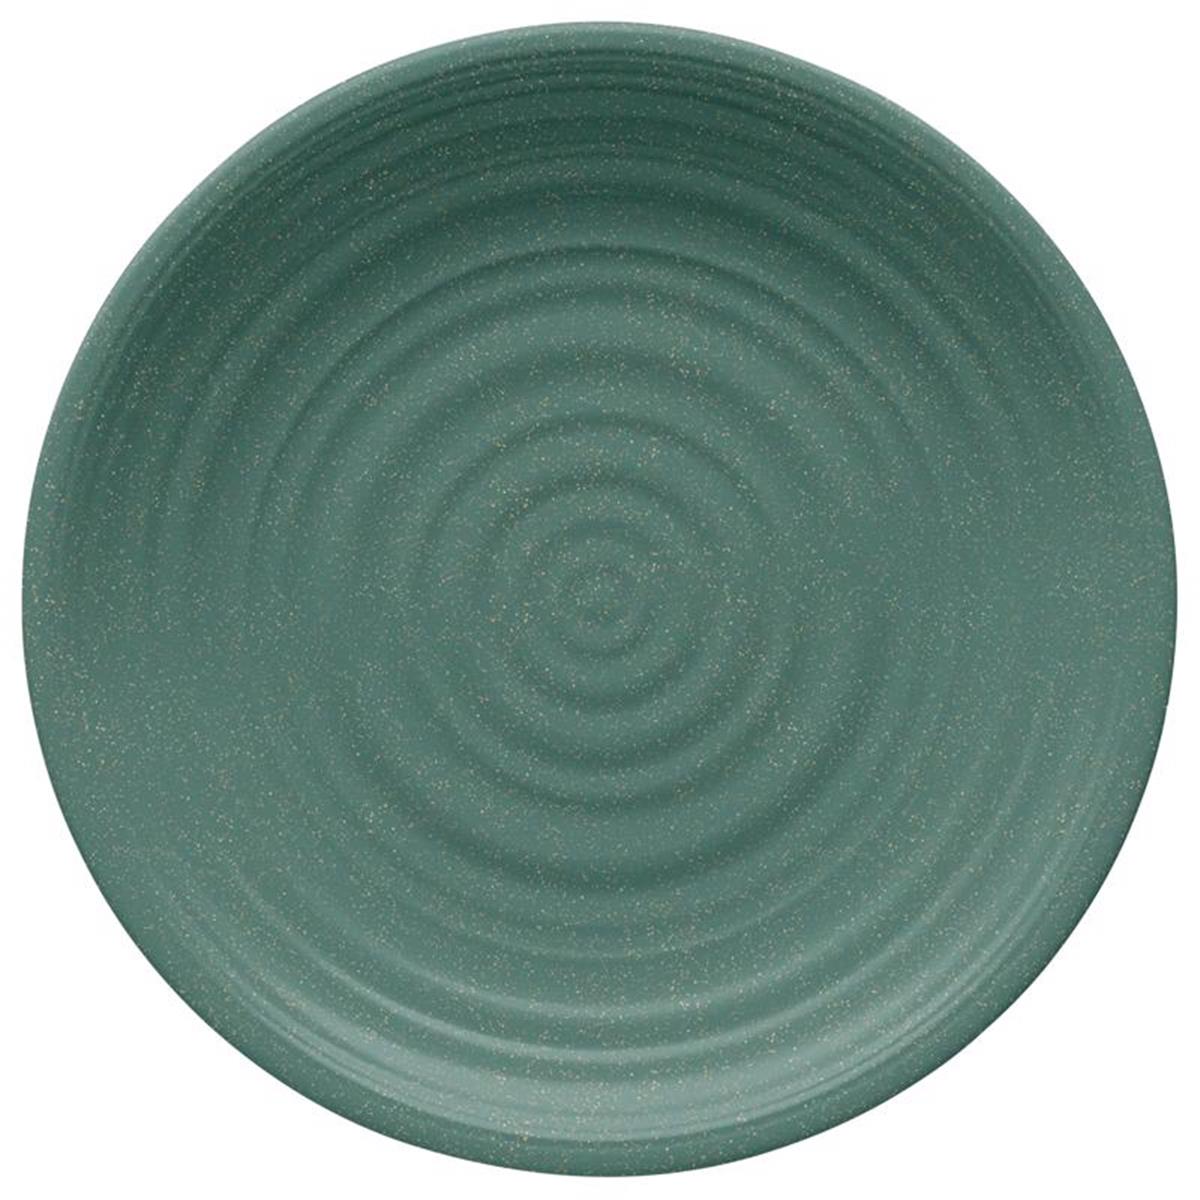 Picture of Tarhong 6032031 8.5 in. Dia. Bamboo Planta Artisan Salad Plate, Teal - Pack of 6